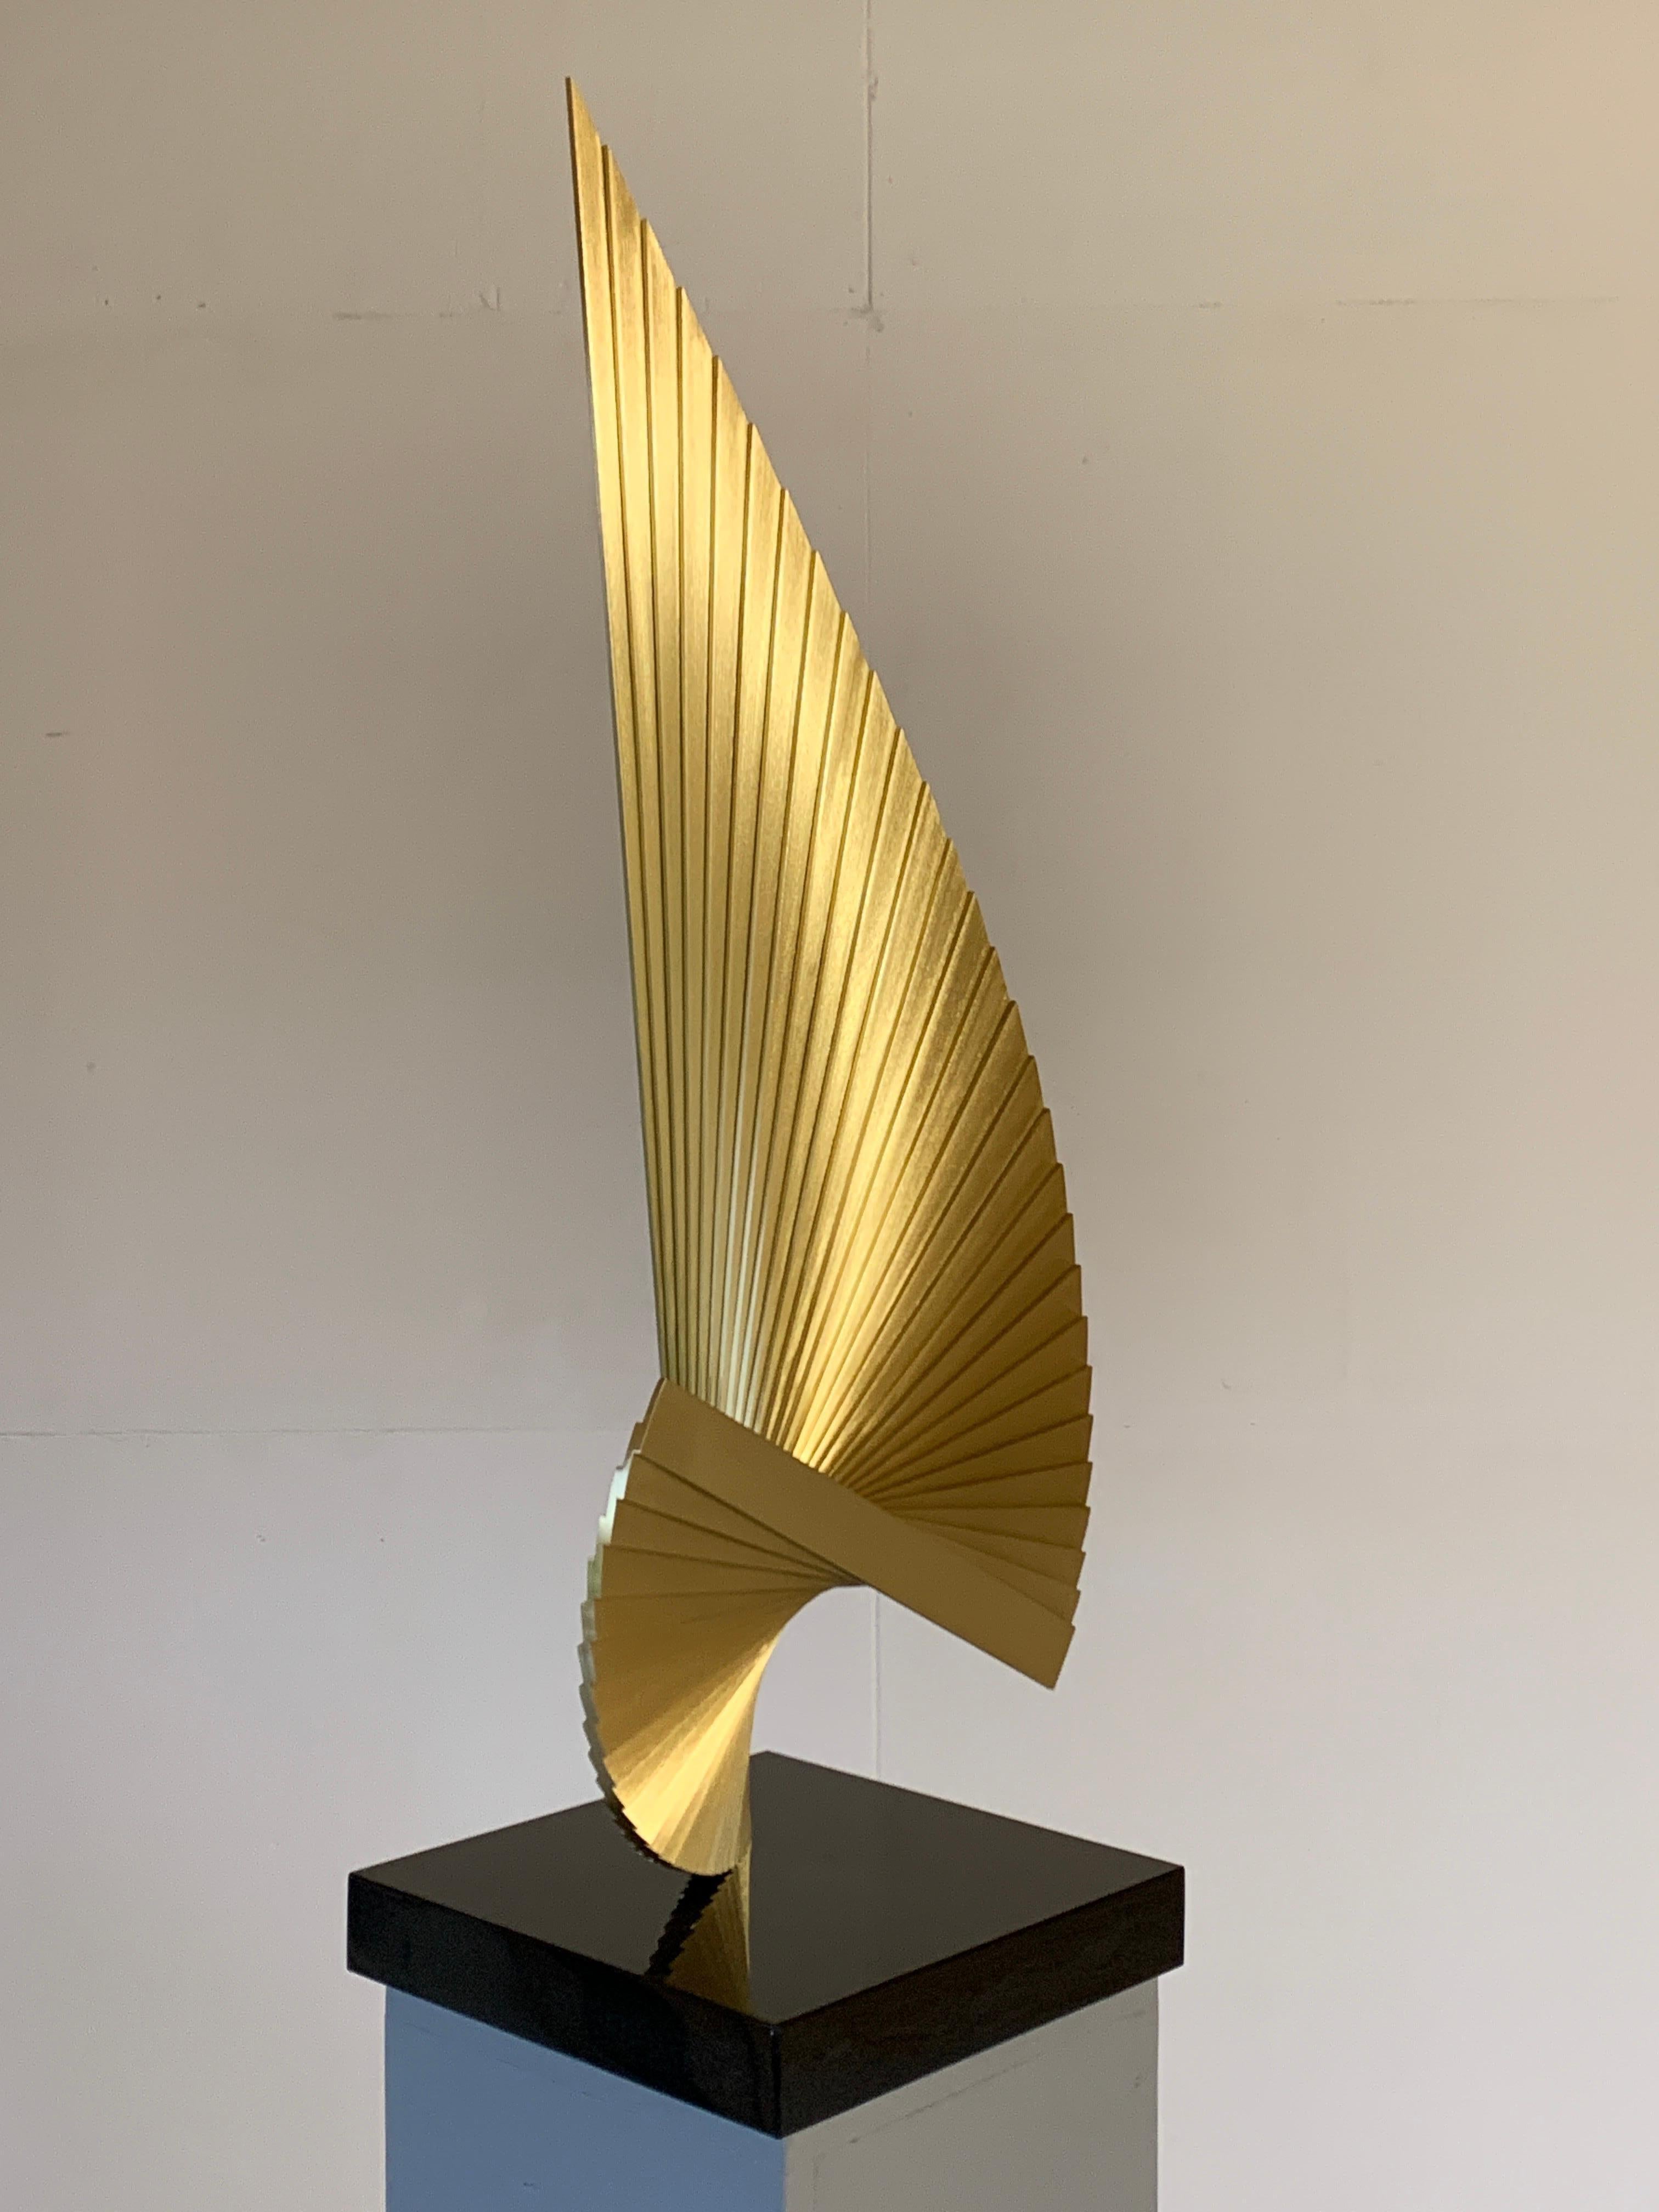 Mid-Century Modern Tabletop sculpture in brushed brass inspired by proportions of the Golden Ratio